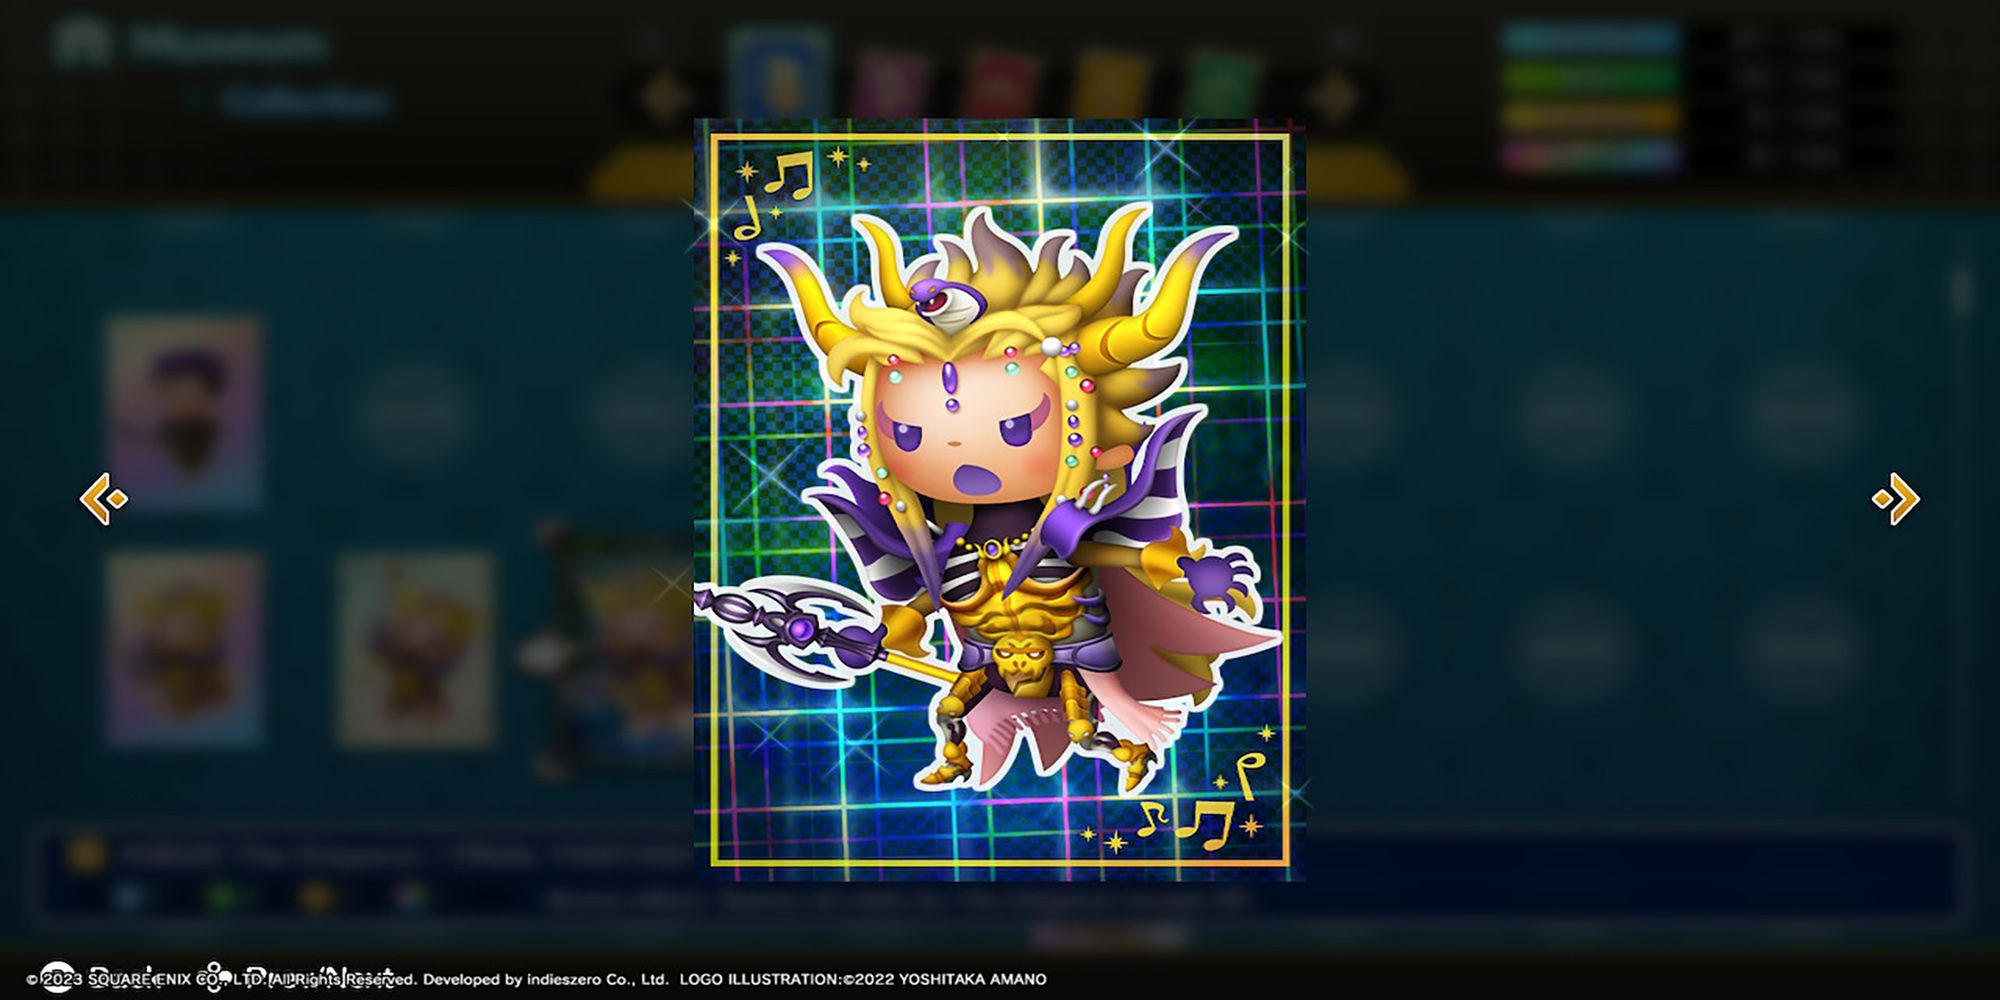 The Emperor lunges against a neon light background in this Character CollectaCard from Theatrhythm: Final Bar Line.